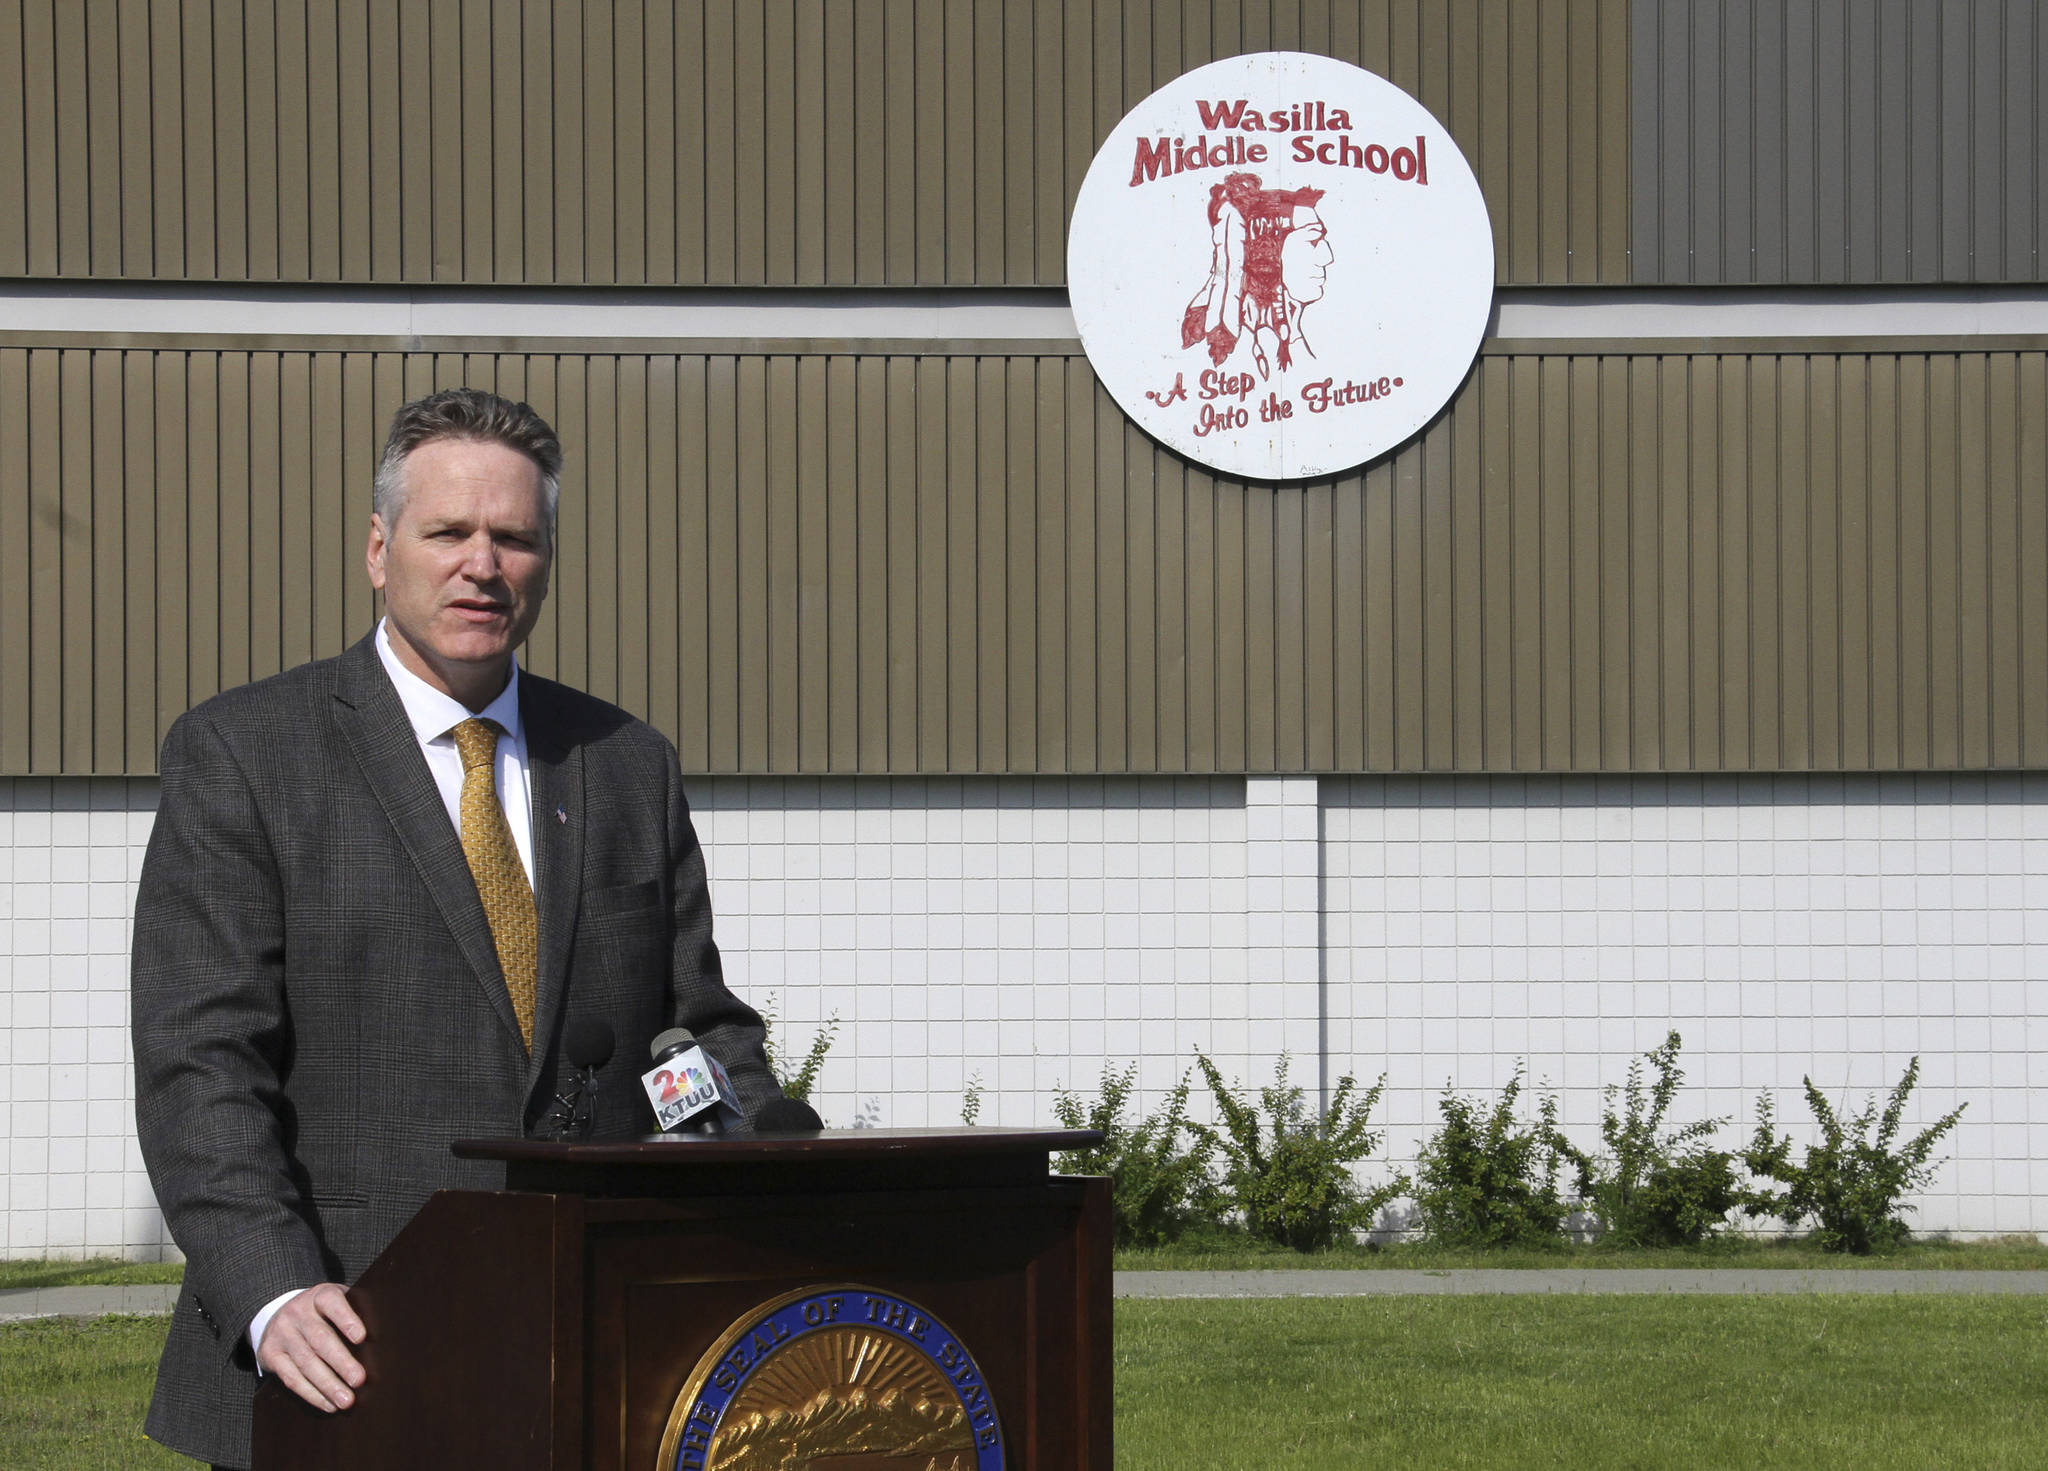 Alaska Gov. Mike Dunleavy speaks at a news conference Friday, June 14, 2019, in Wasilla, Alaska. Dunleavy has called lawmakers into special session July 8 in Wasilla, and his administration gave a tour of the recommended site at Wasilla Middle School to reporters. (AP Photo/Mark Thiessen)